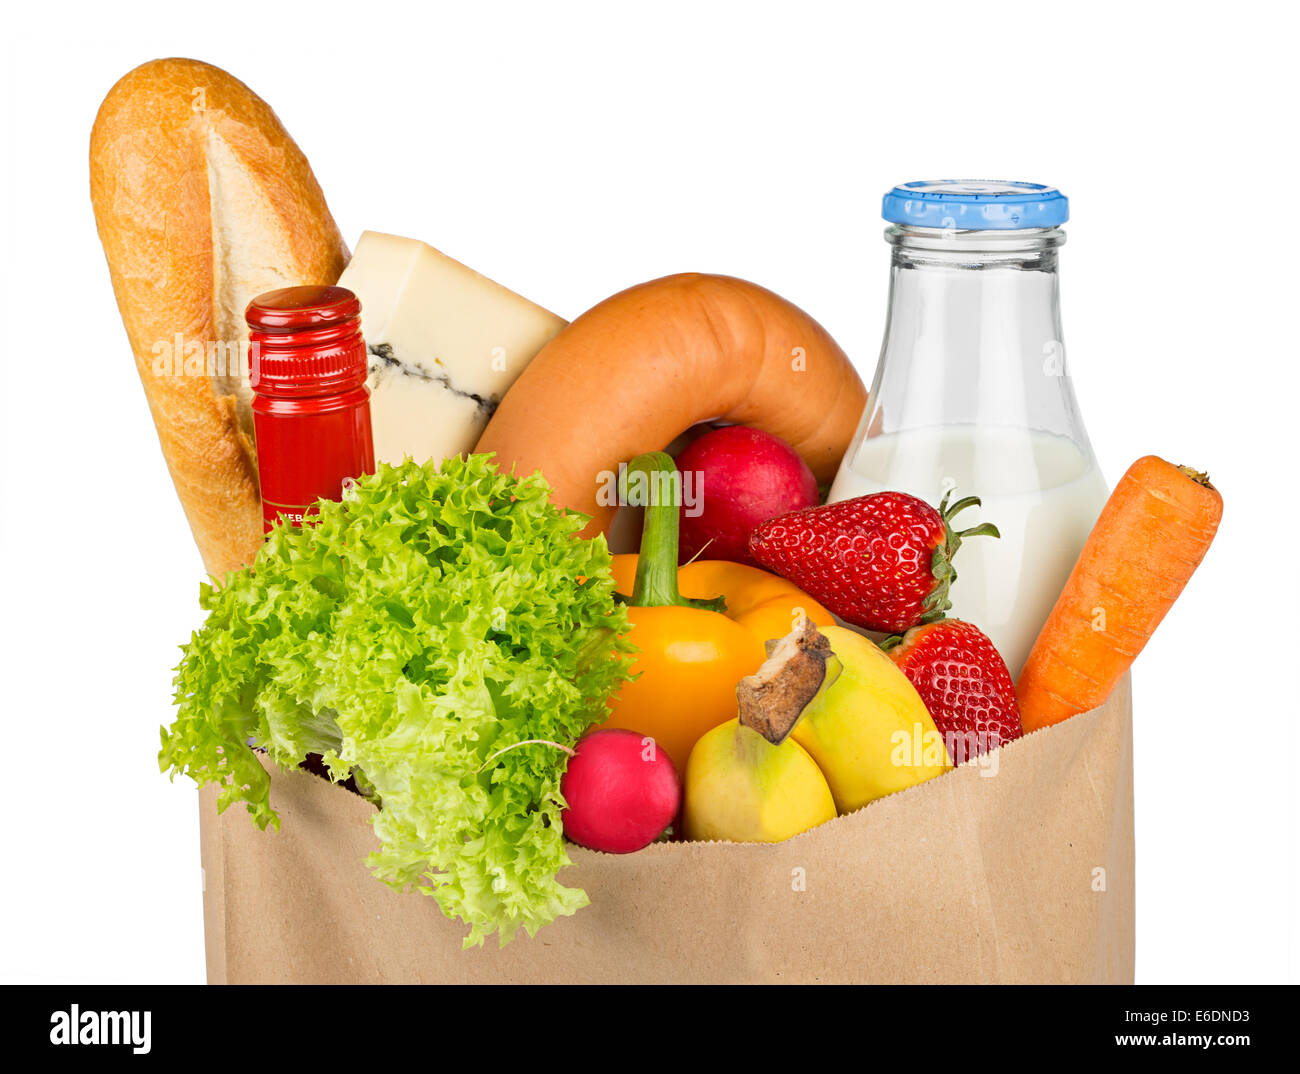 shopping bag filled with food Stock Photo